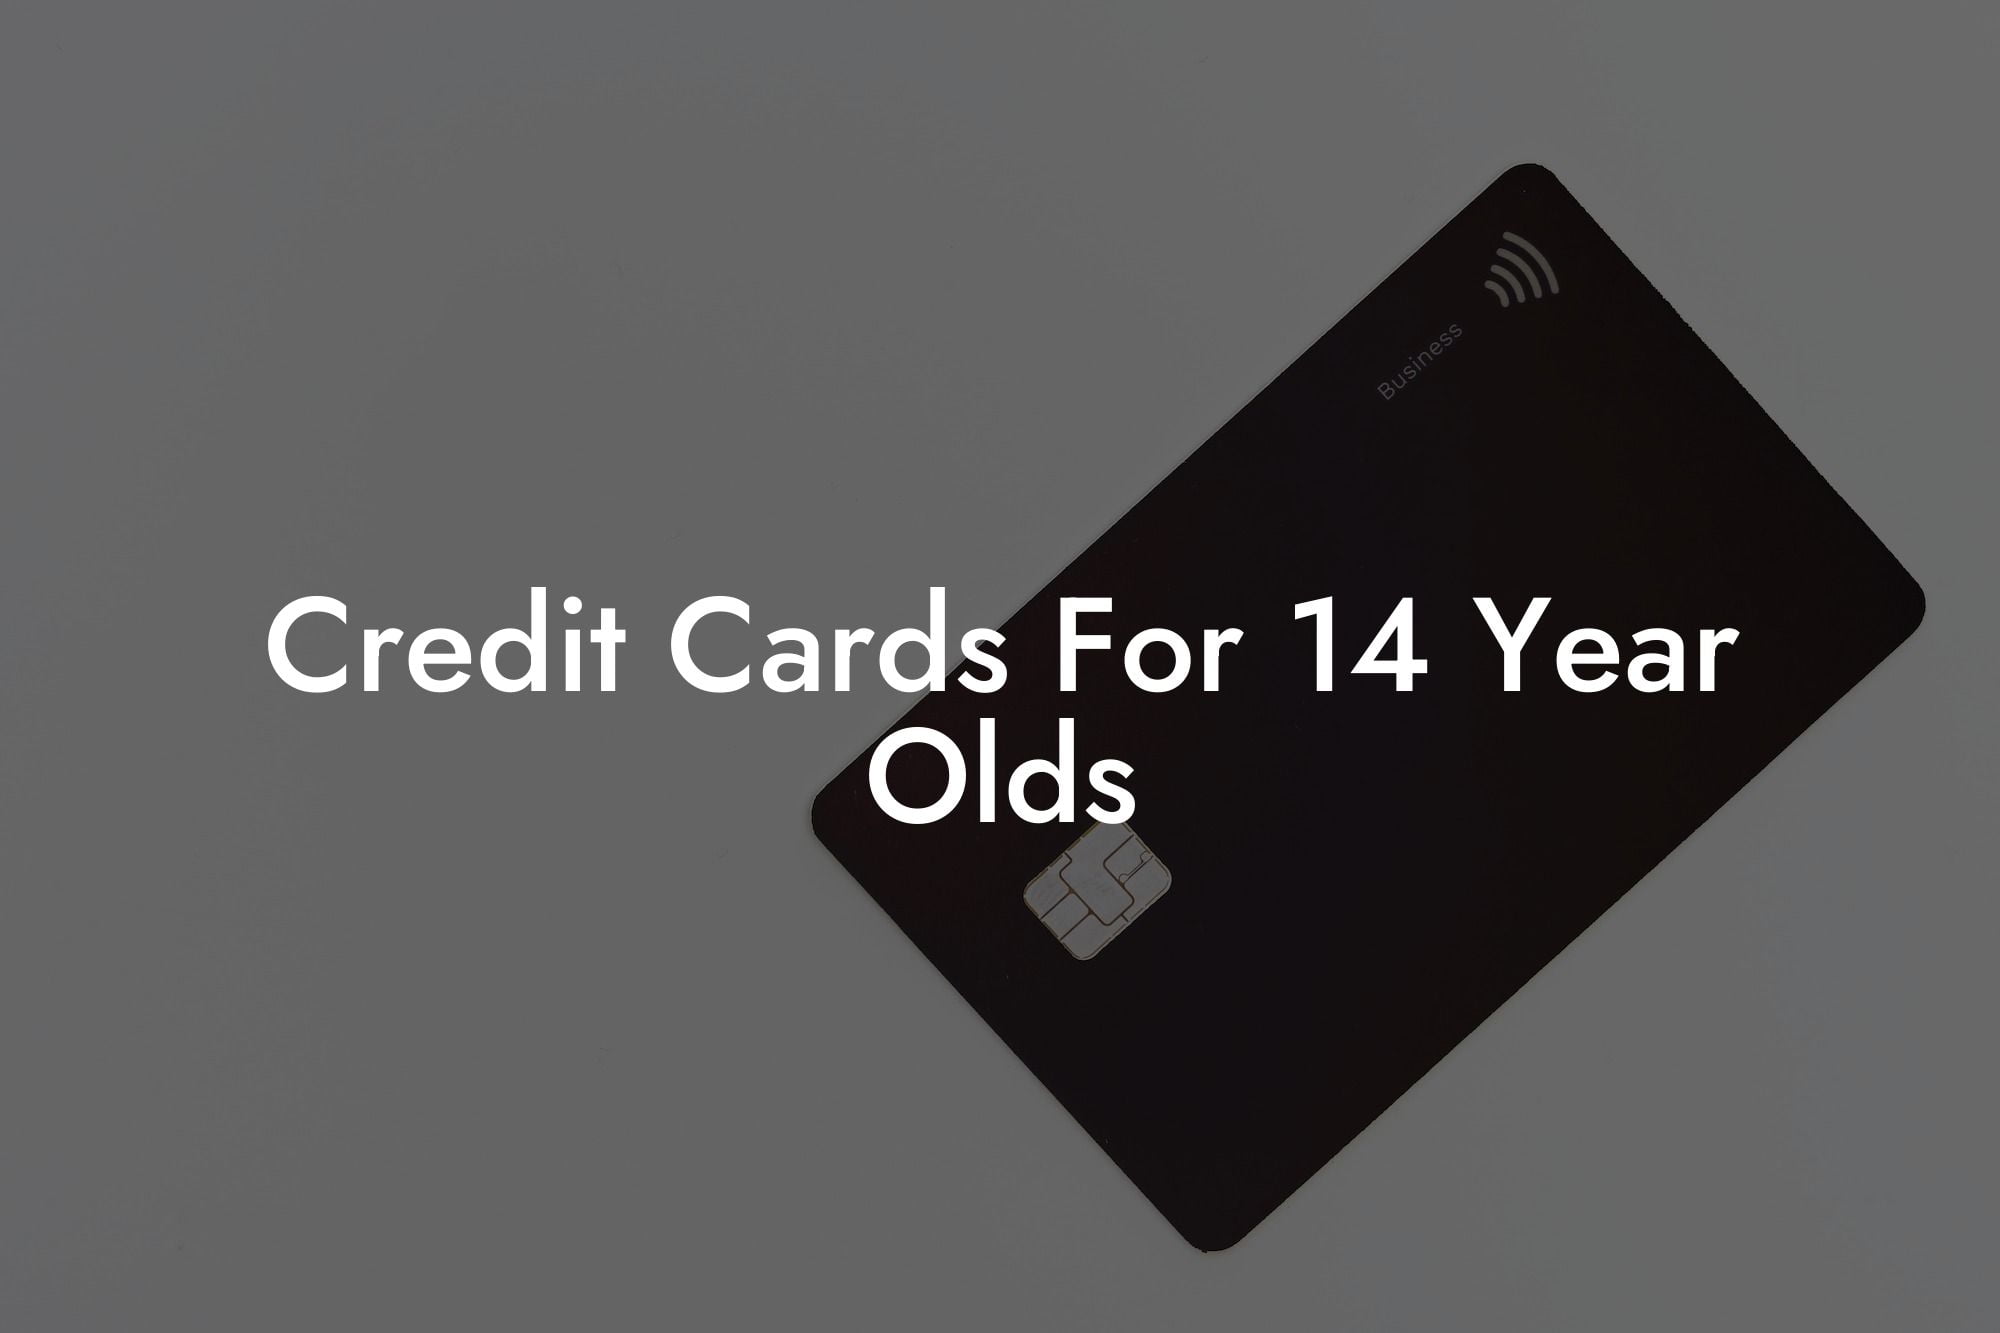 Credit Cards For 14 Year Olds